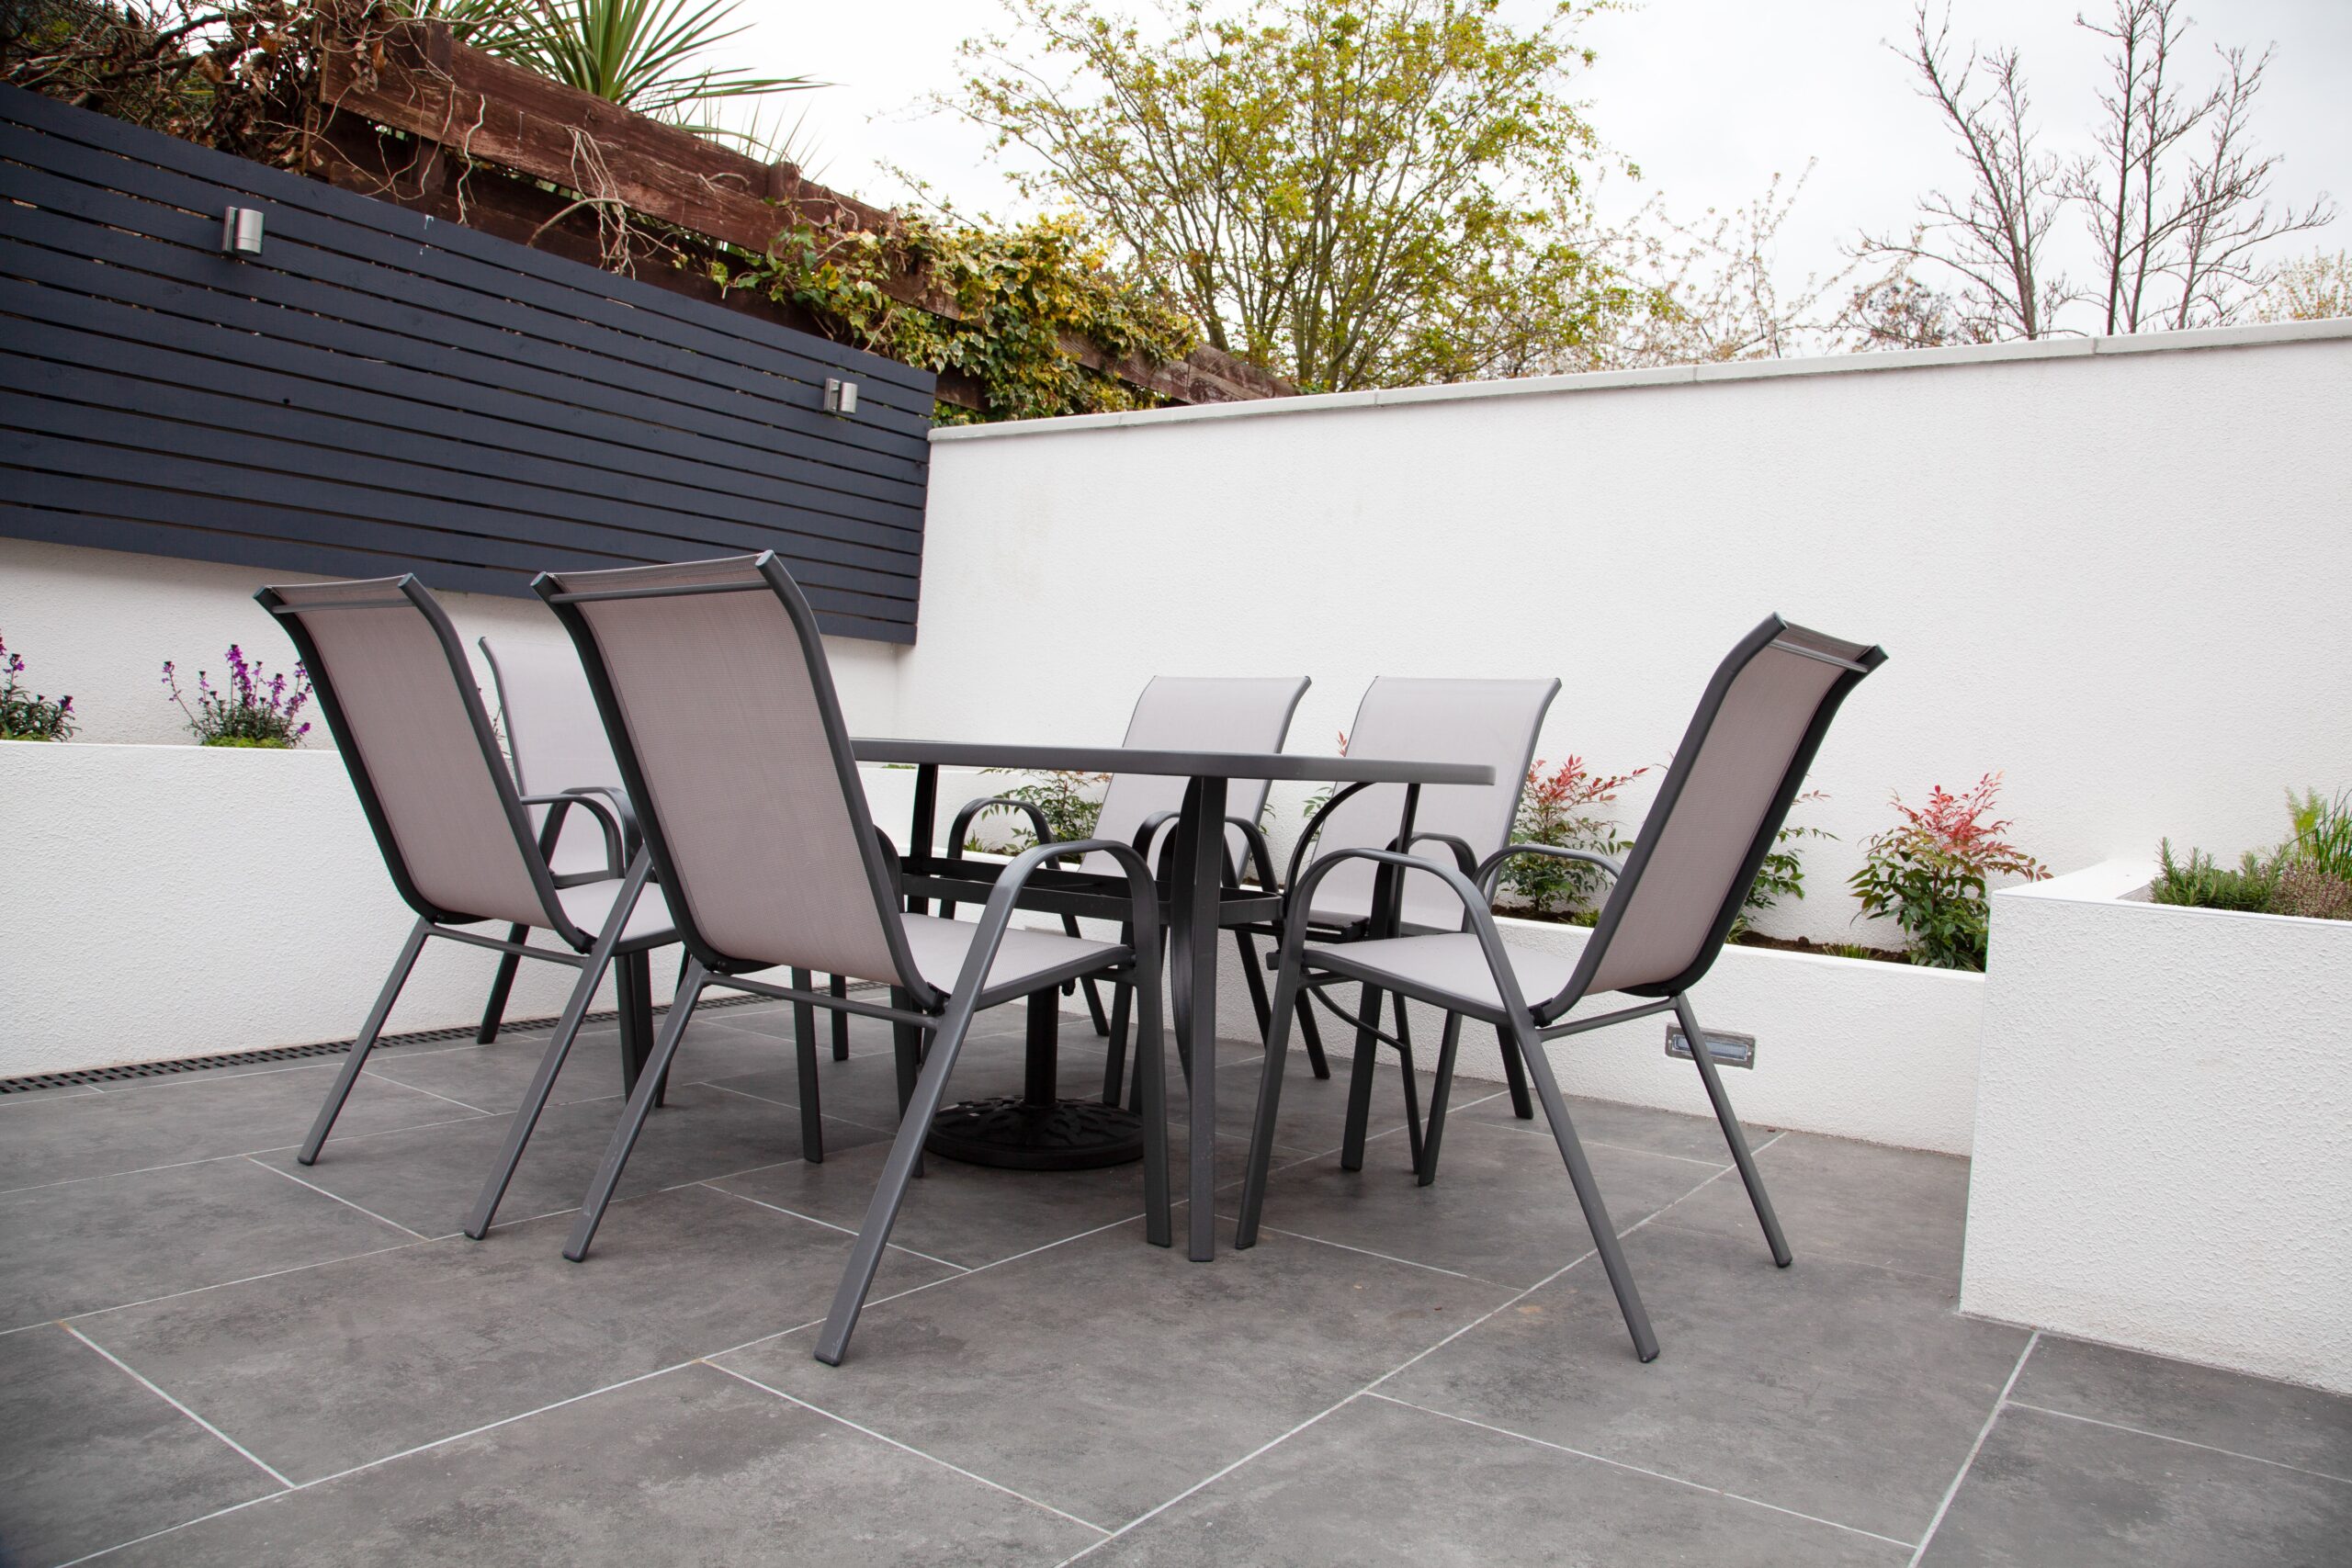  What are the Benefits of Porcelain Deck Tiles?